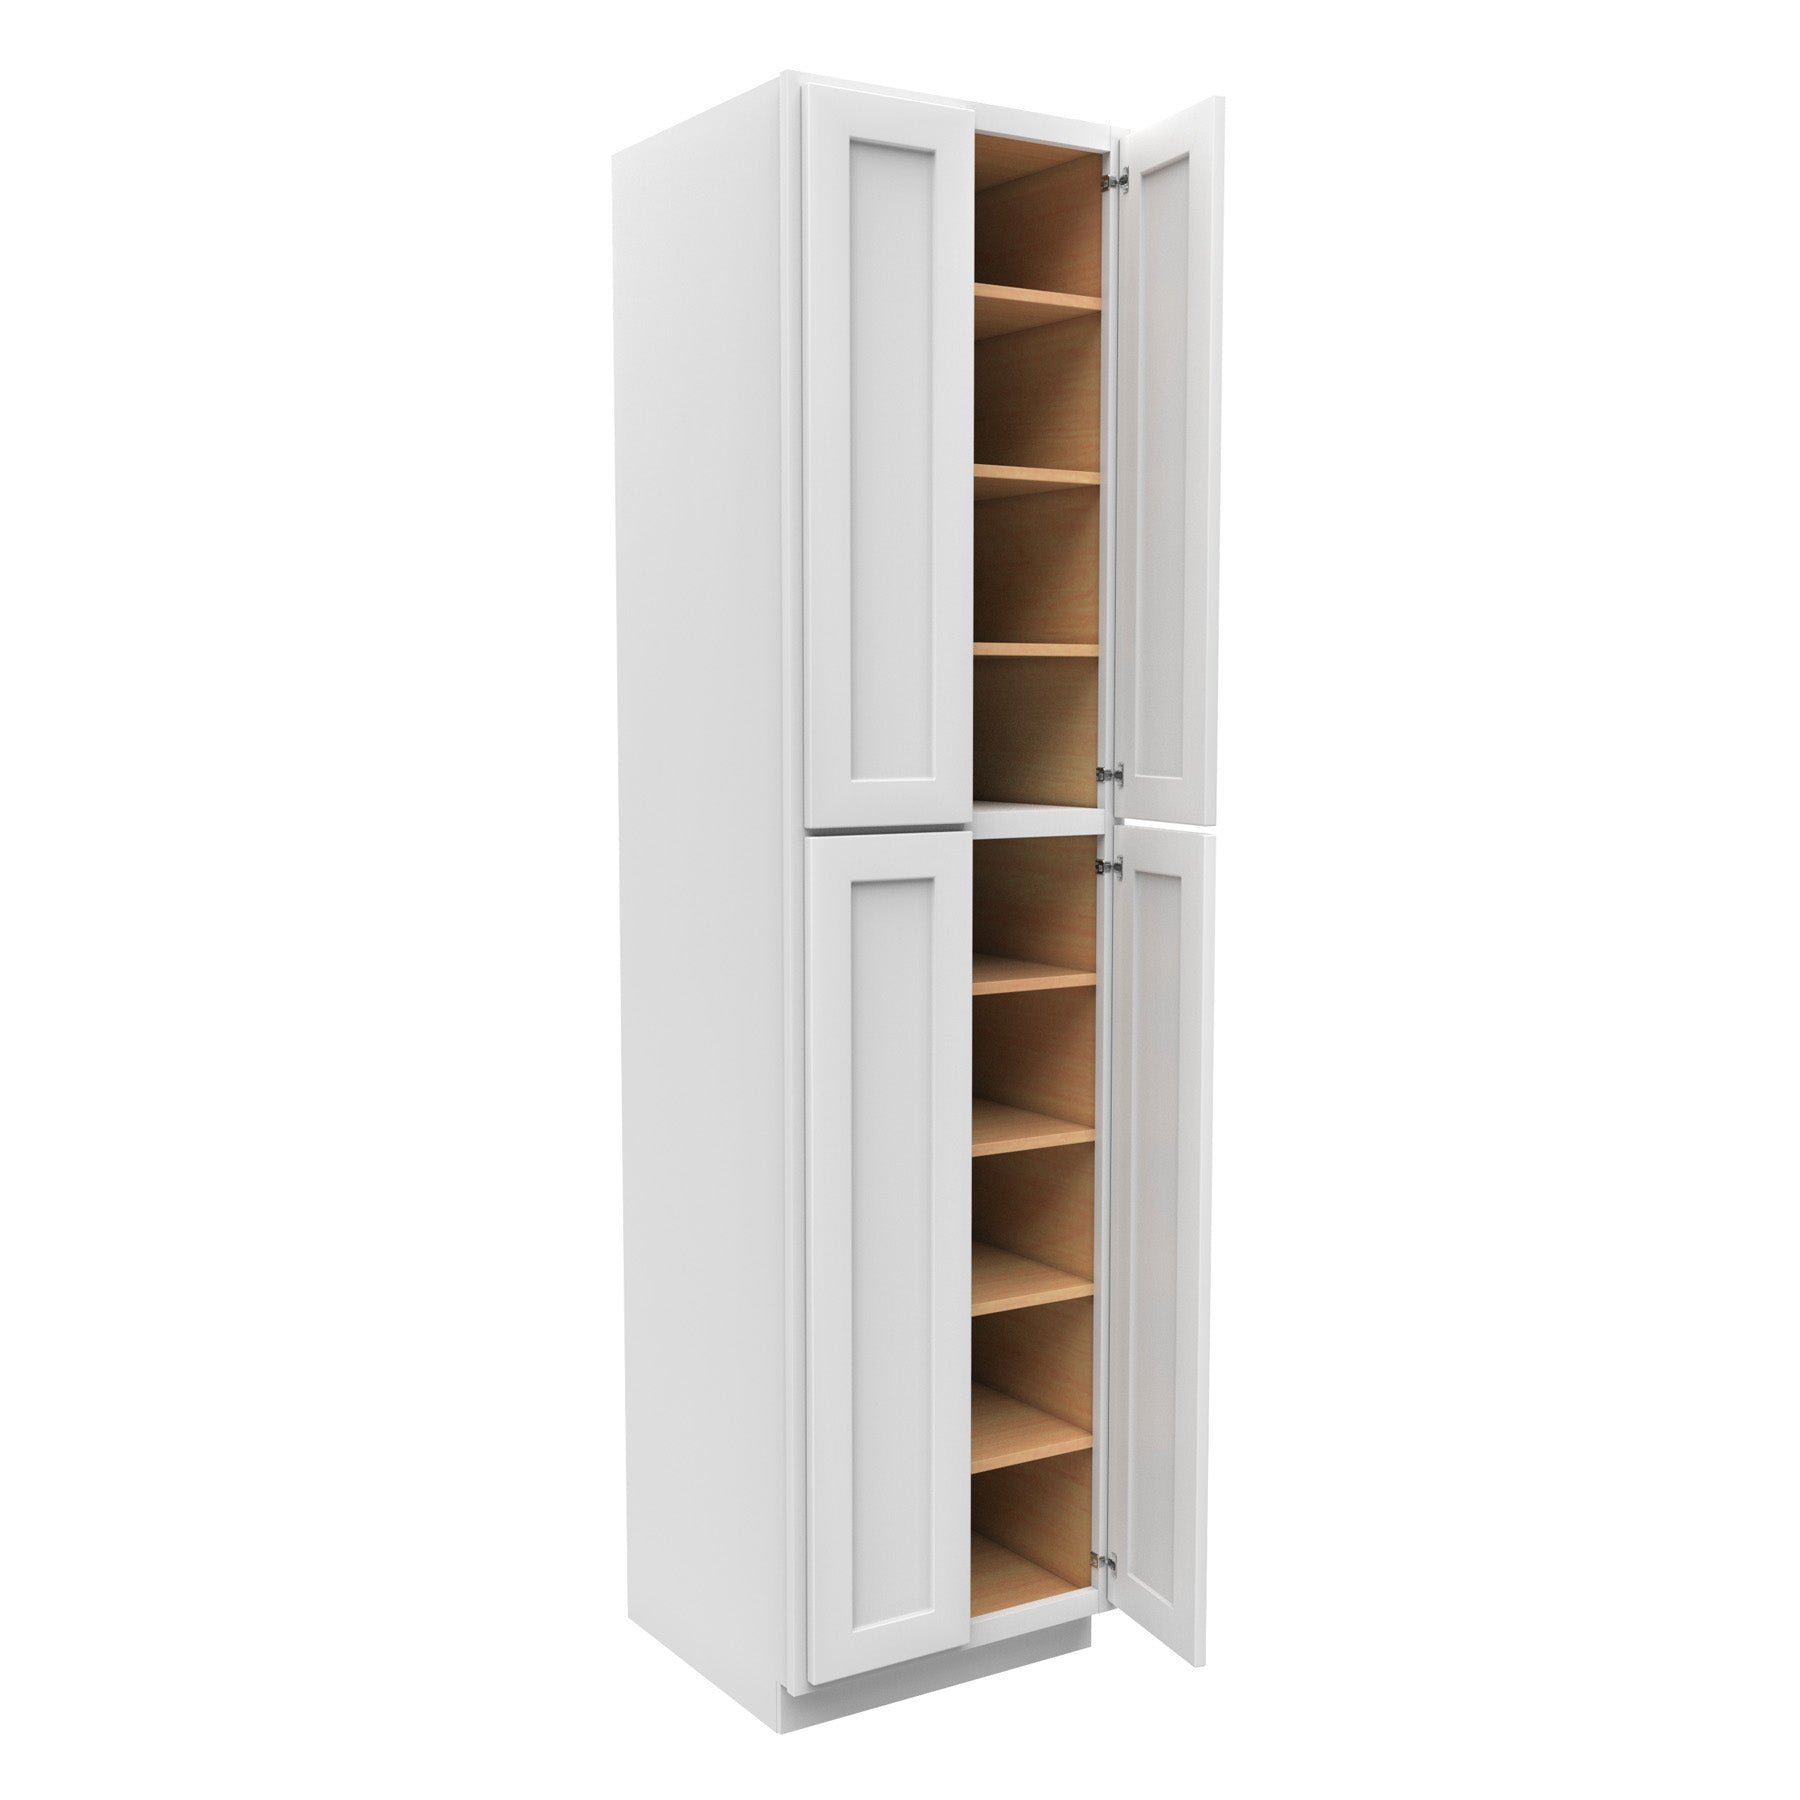 96 Inch High Pantry Cabinet With Double Door - Luxor White Shaker - Ready To Assemble, 24"W x 96"H x 24"D